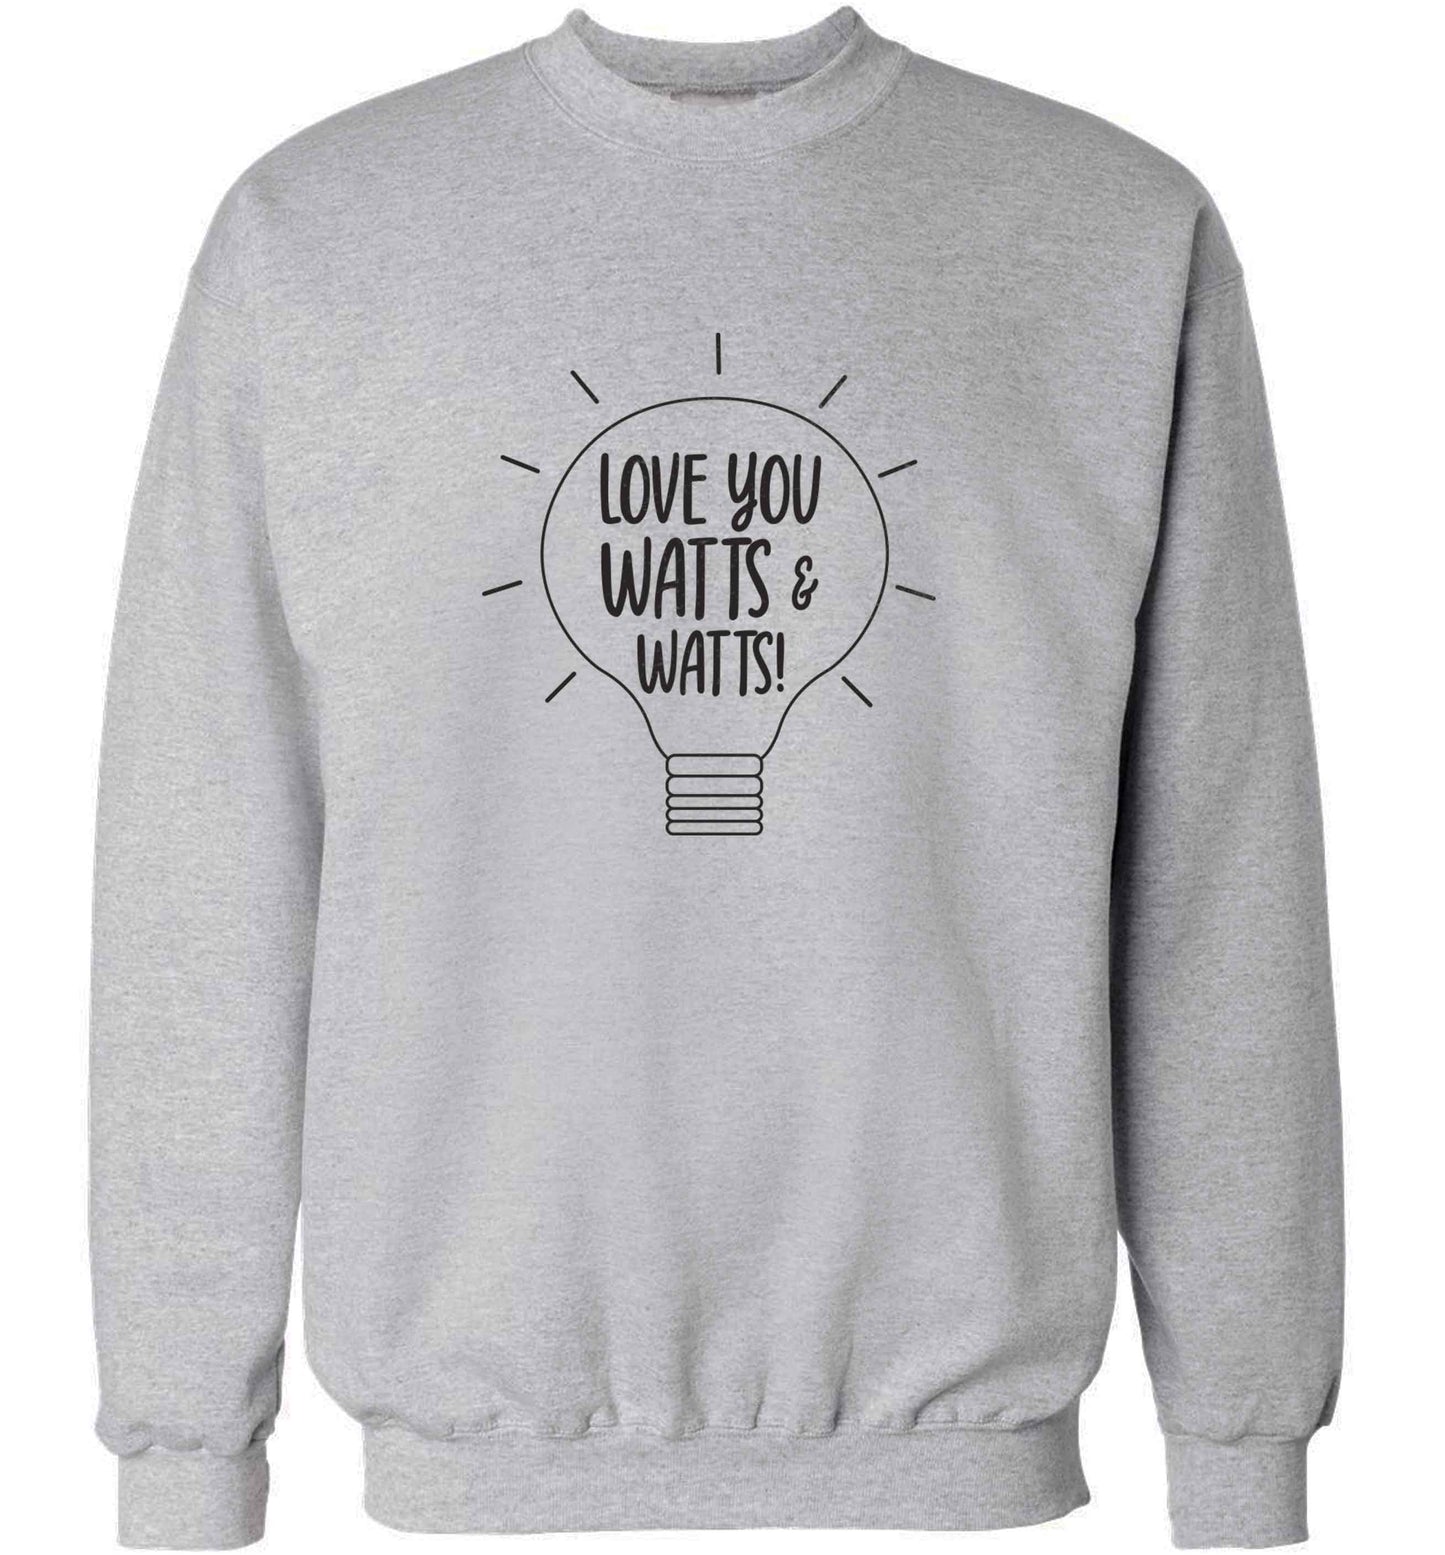 I love you watts and watts adult's unisex grey sweater 2XL